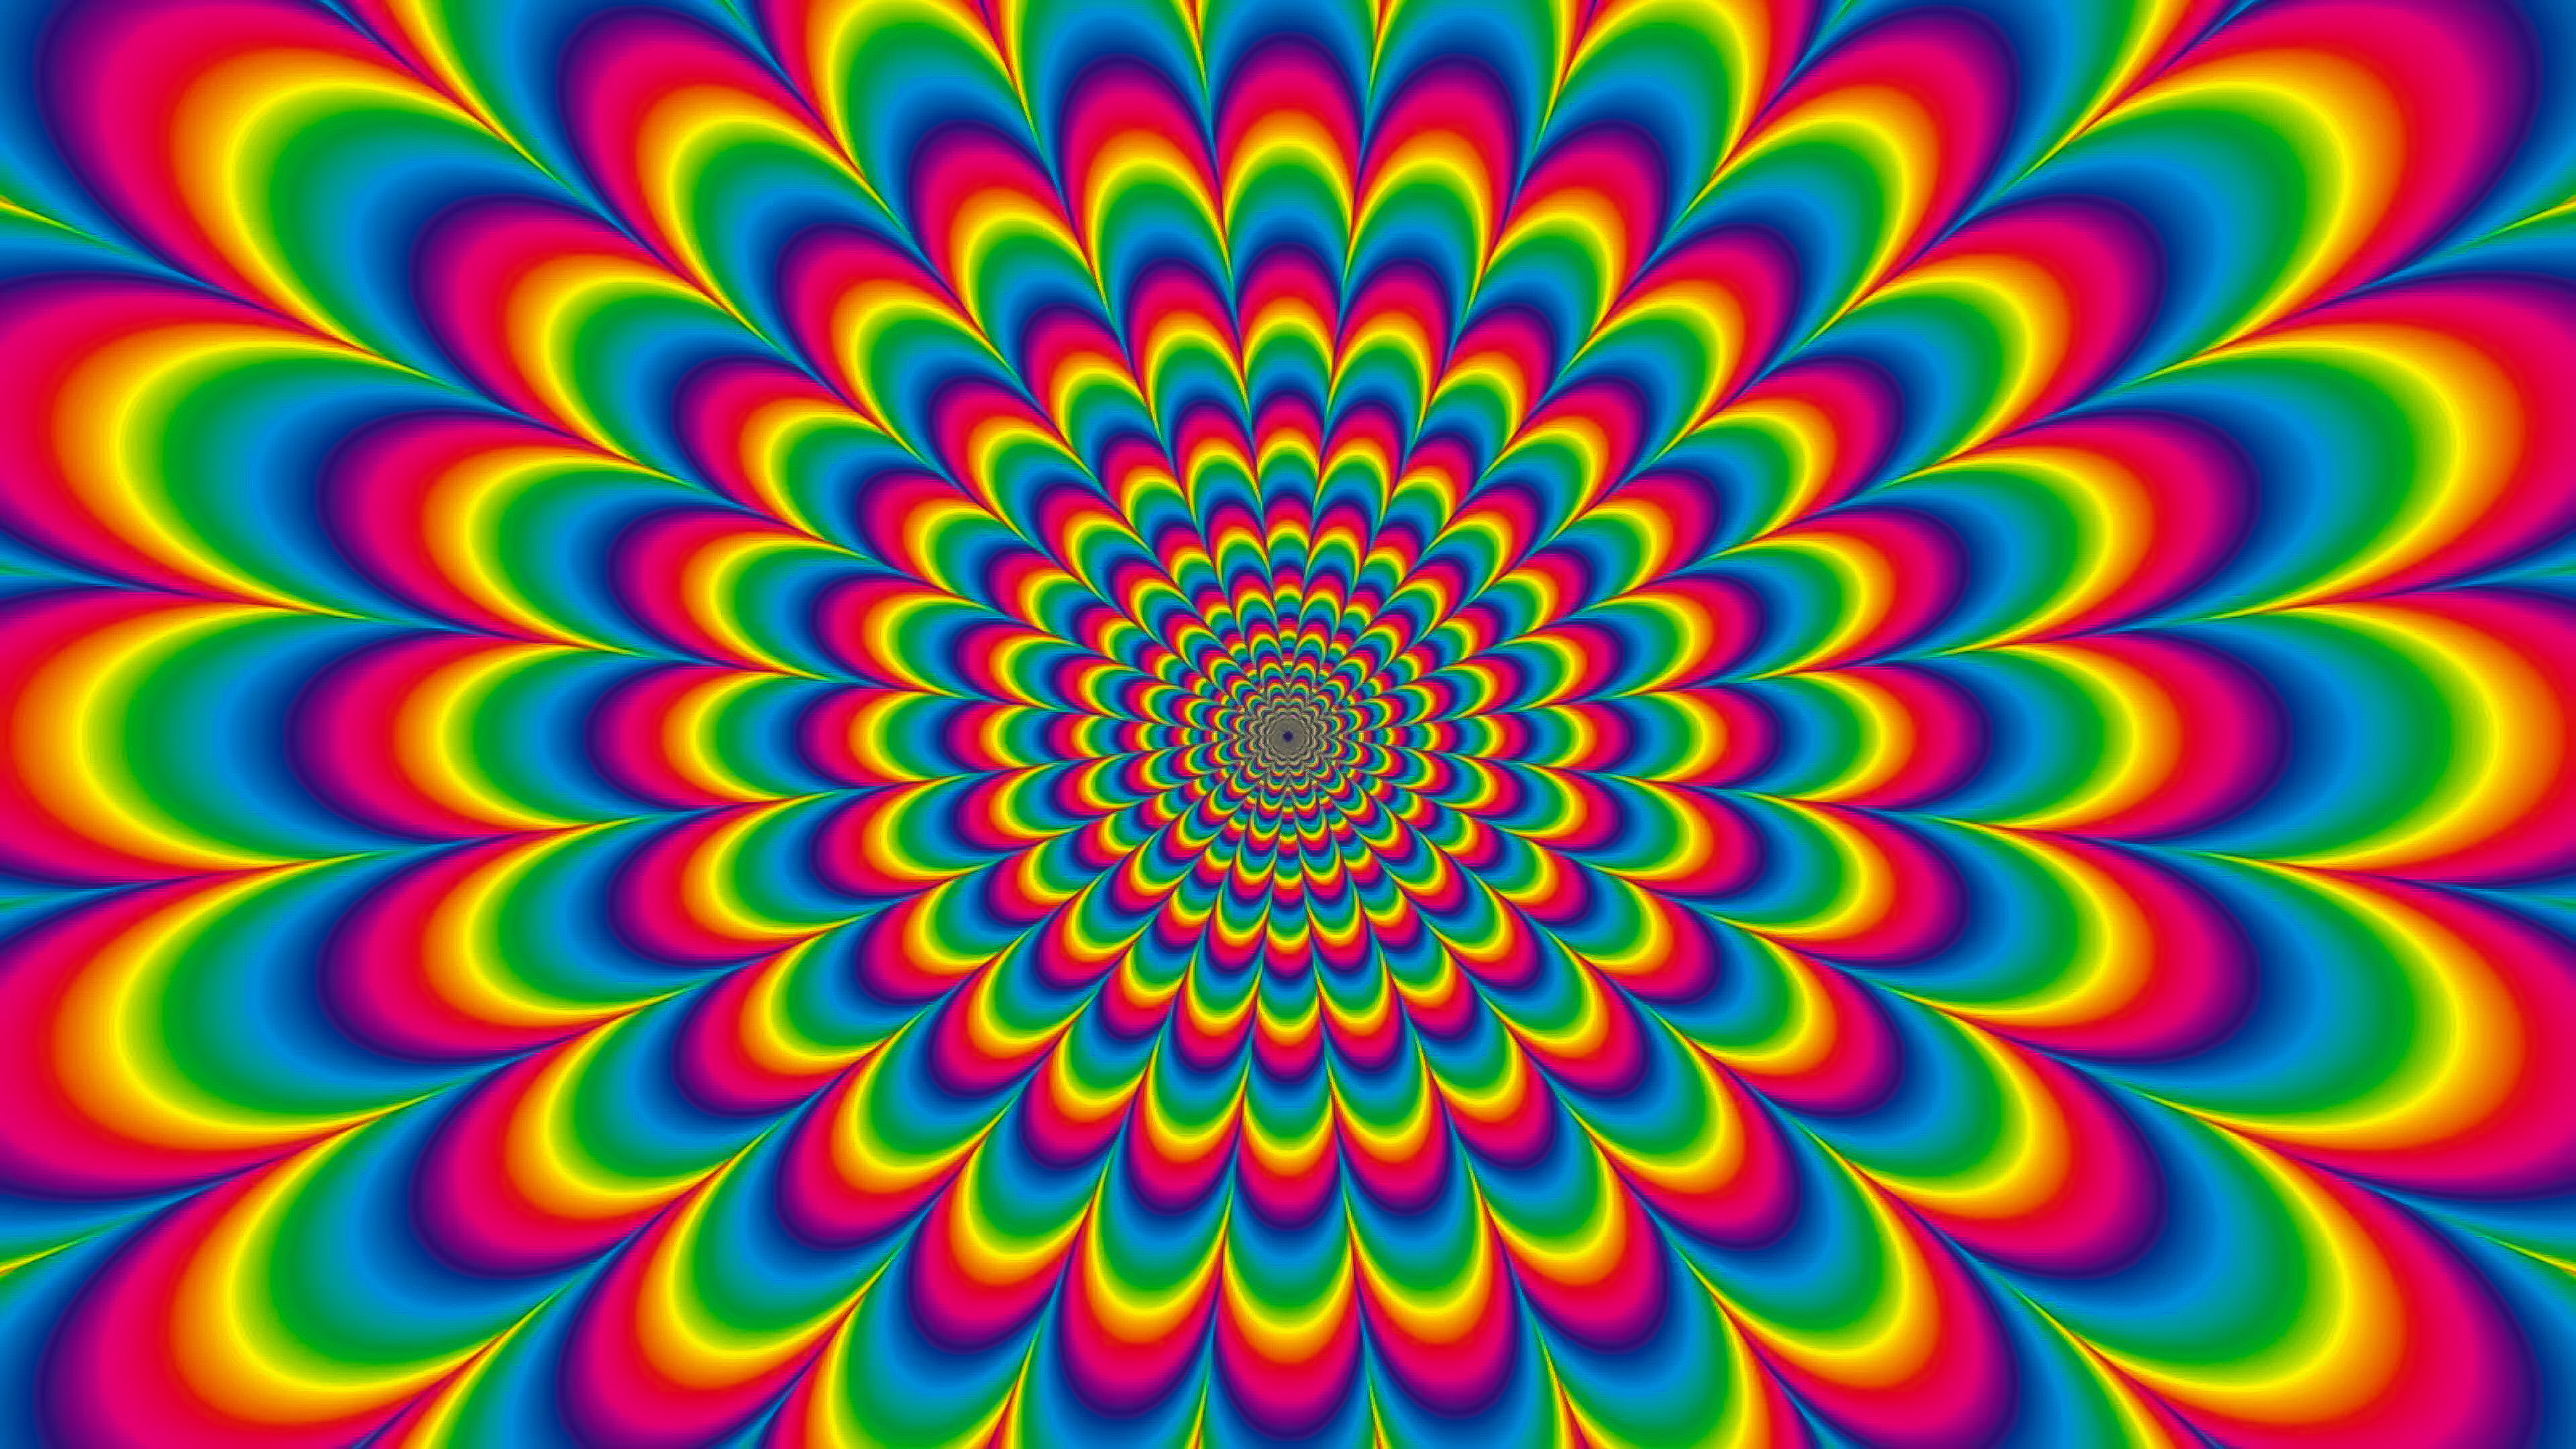 psychedelic Images. psychedelic Art. psychedelic pfp. psychedelic Phone Wal...